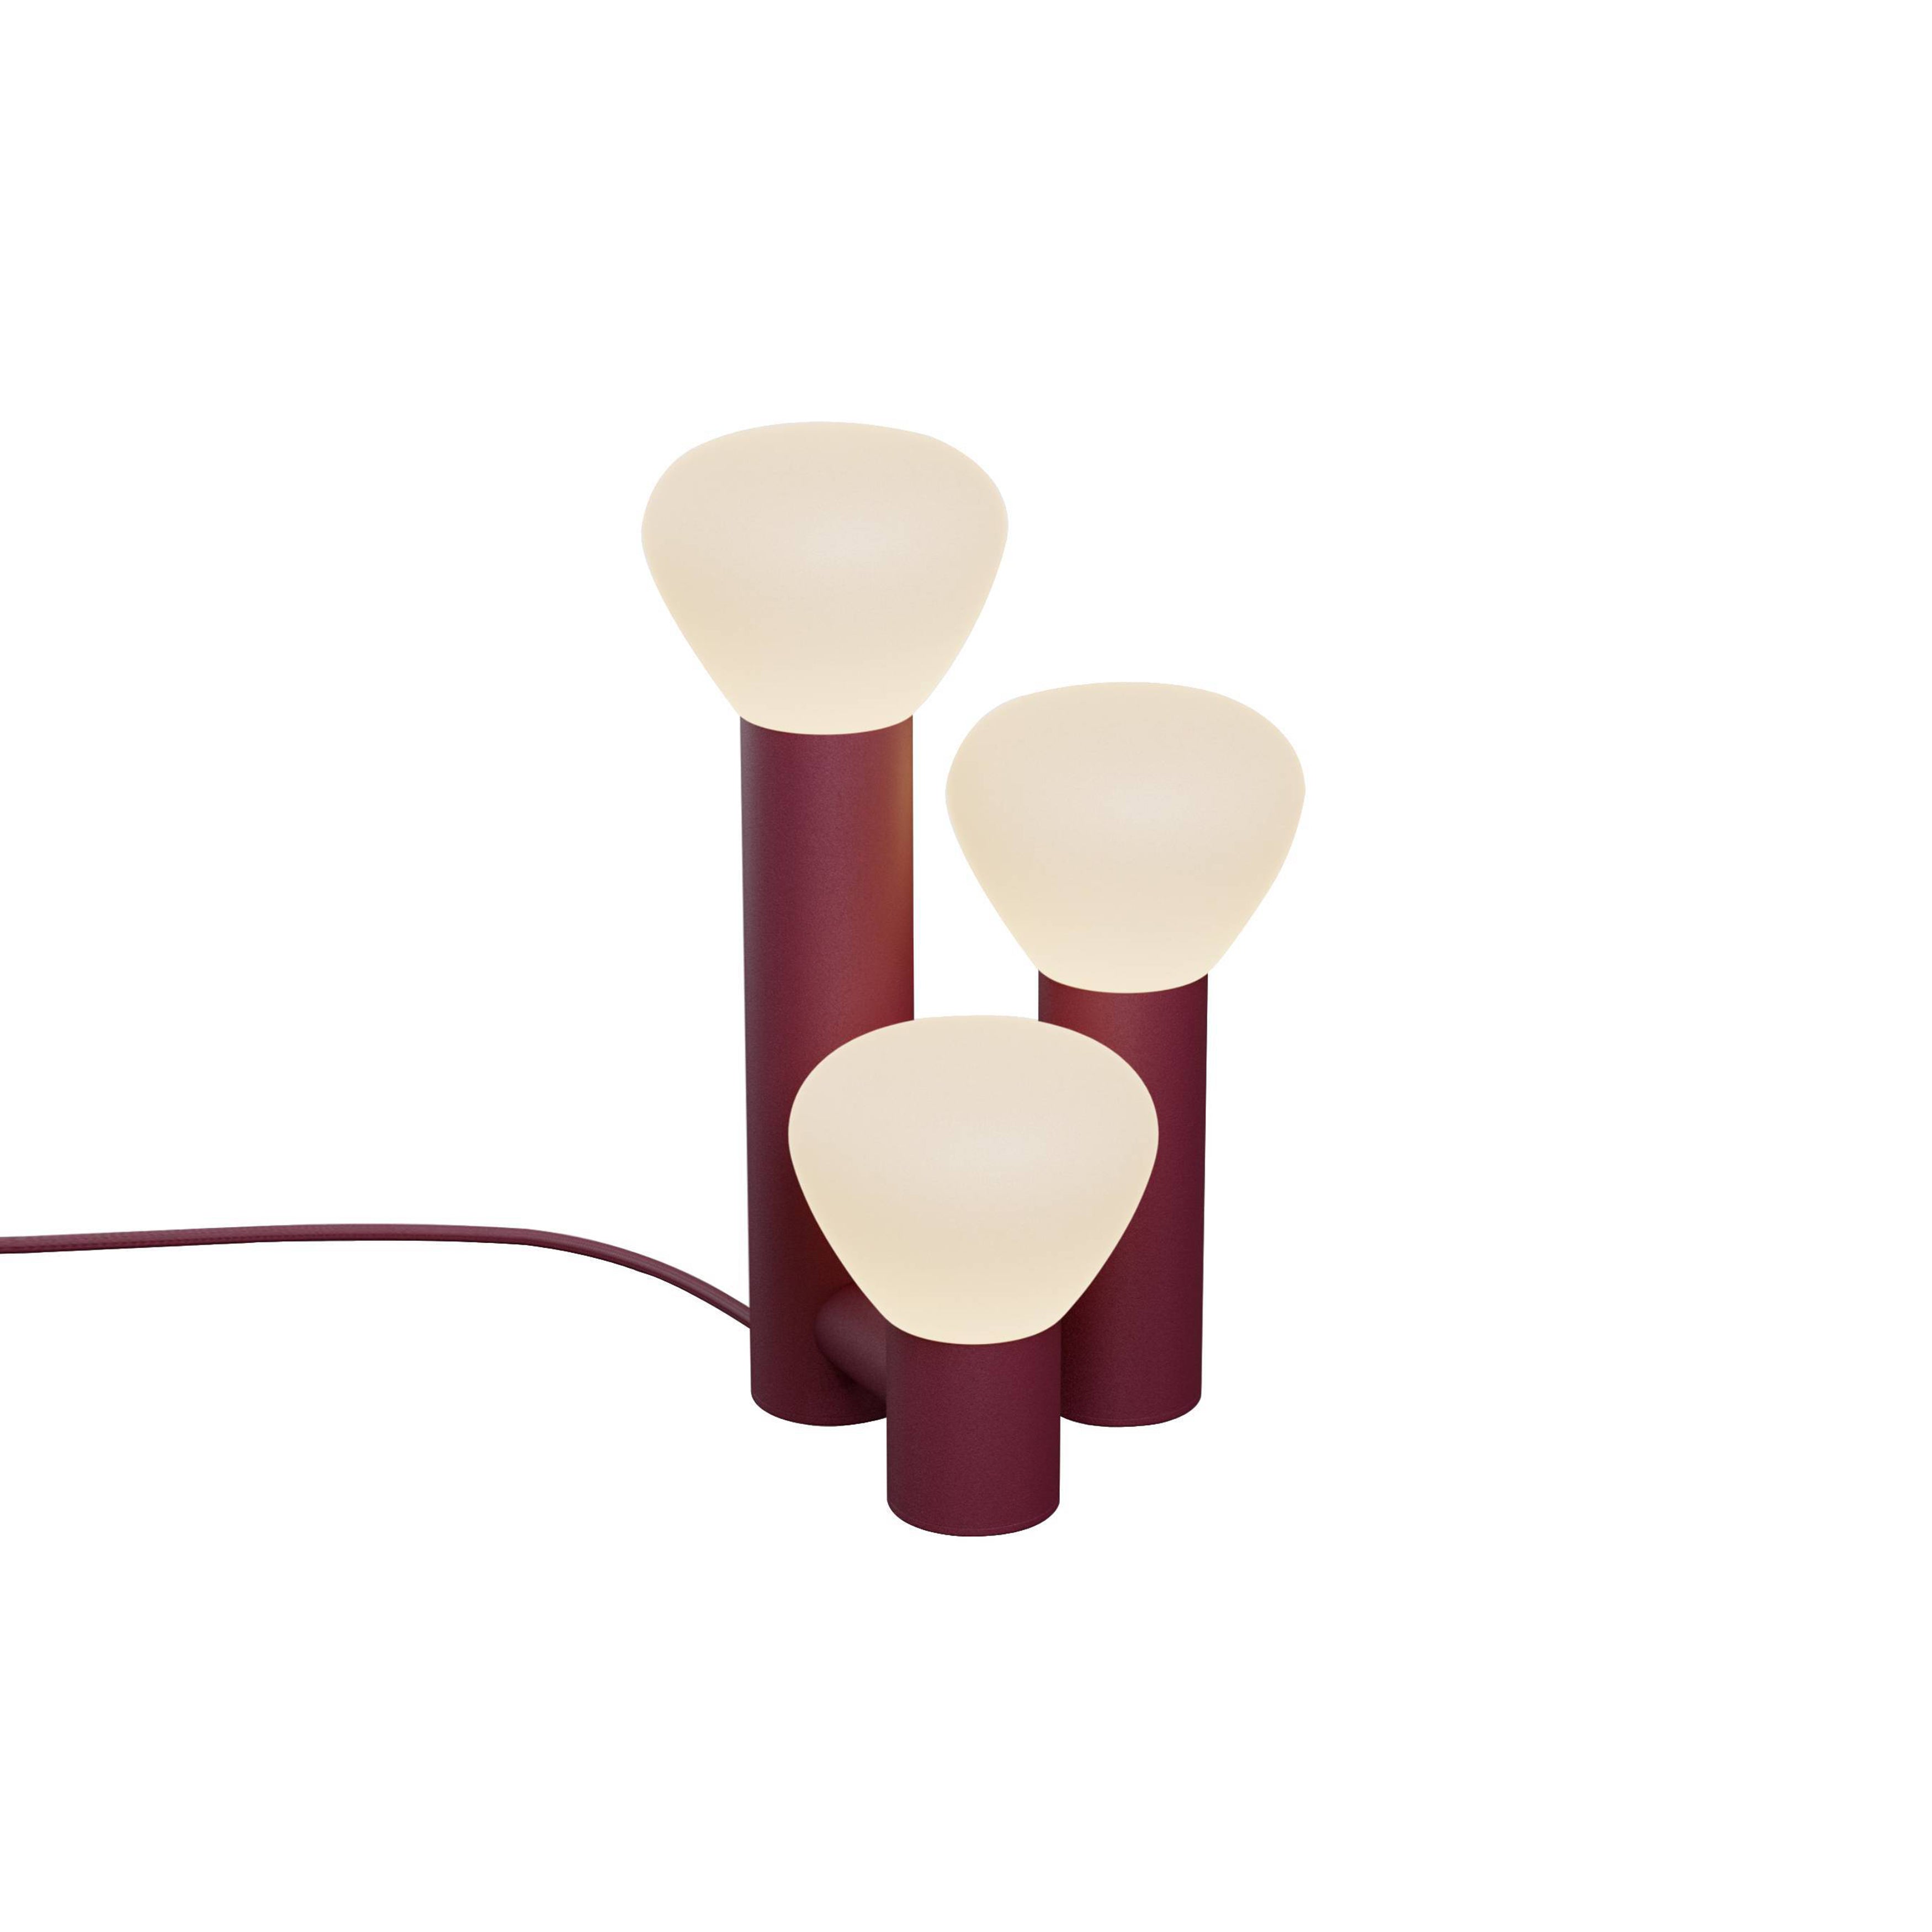 Parc 06 Table Lamp: Handswitch + Burgundy + Burgundy